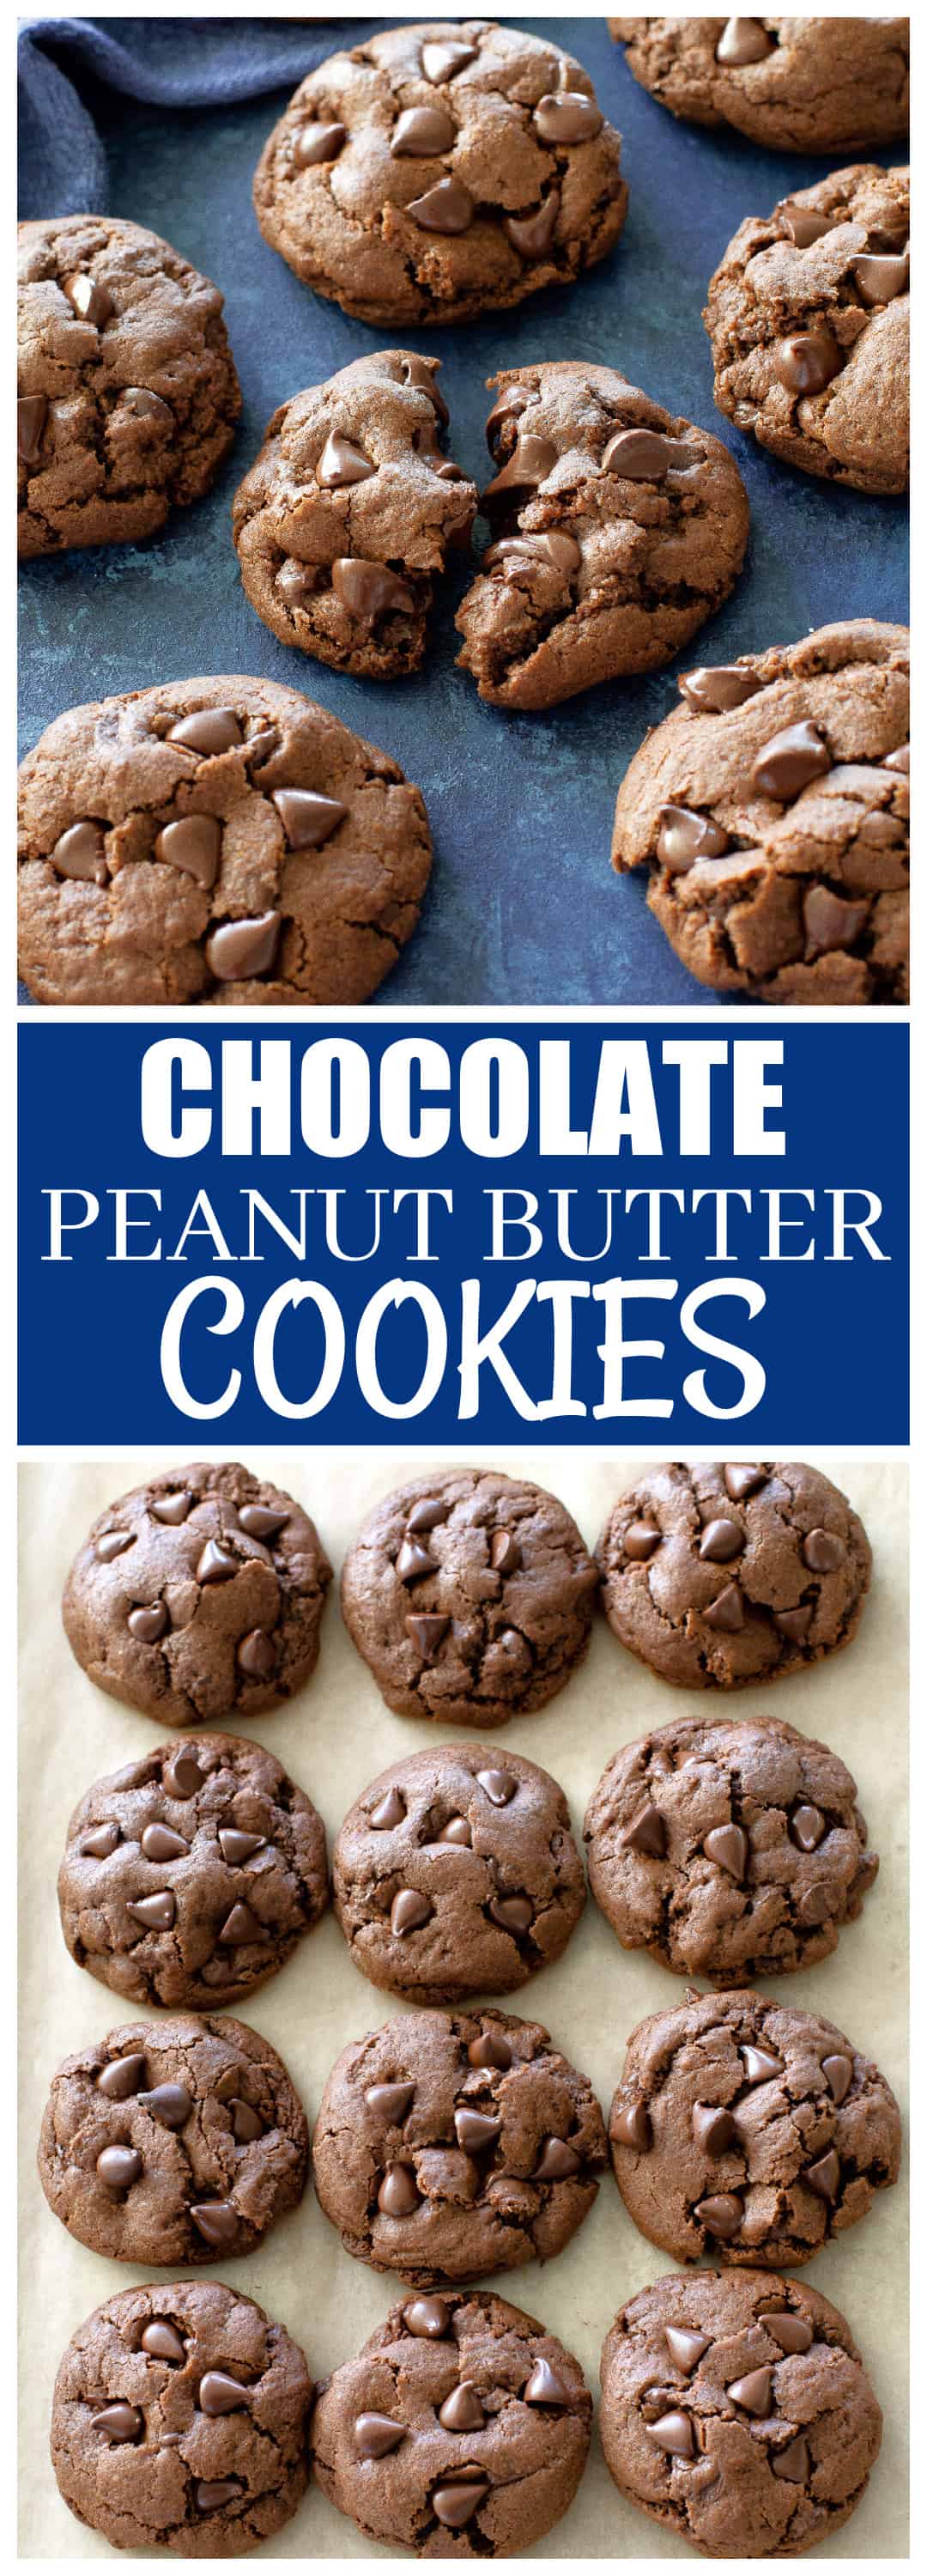 Chocolate Peanut Butter Cookies are rich, fudgy, and full of all the chocolate flavor with a touch of peanut butter. #double #chocolate #peanut #butter #cookies #recipe #dessert